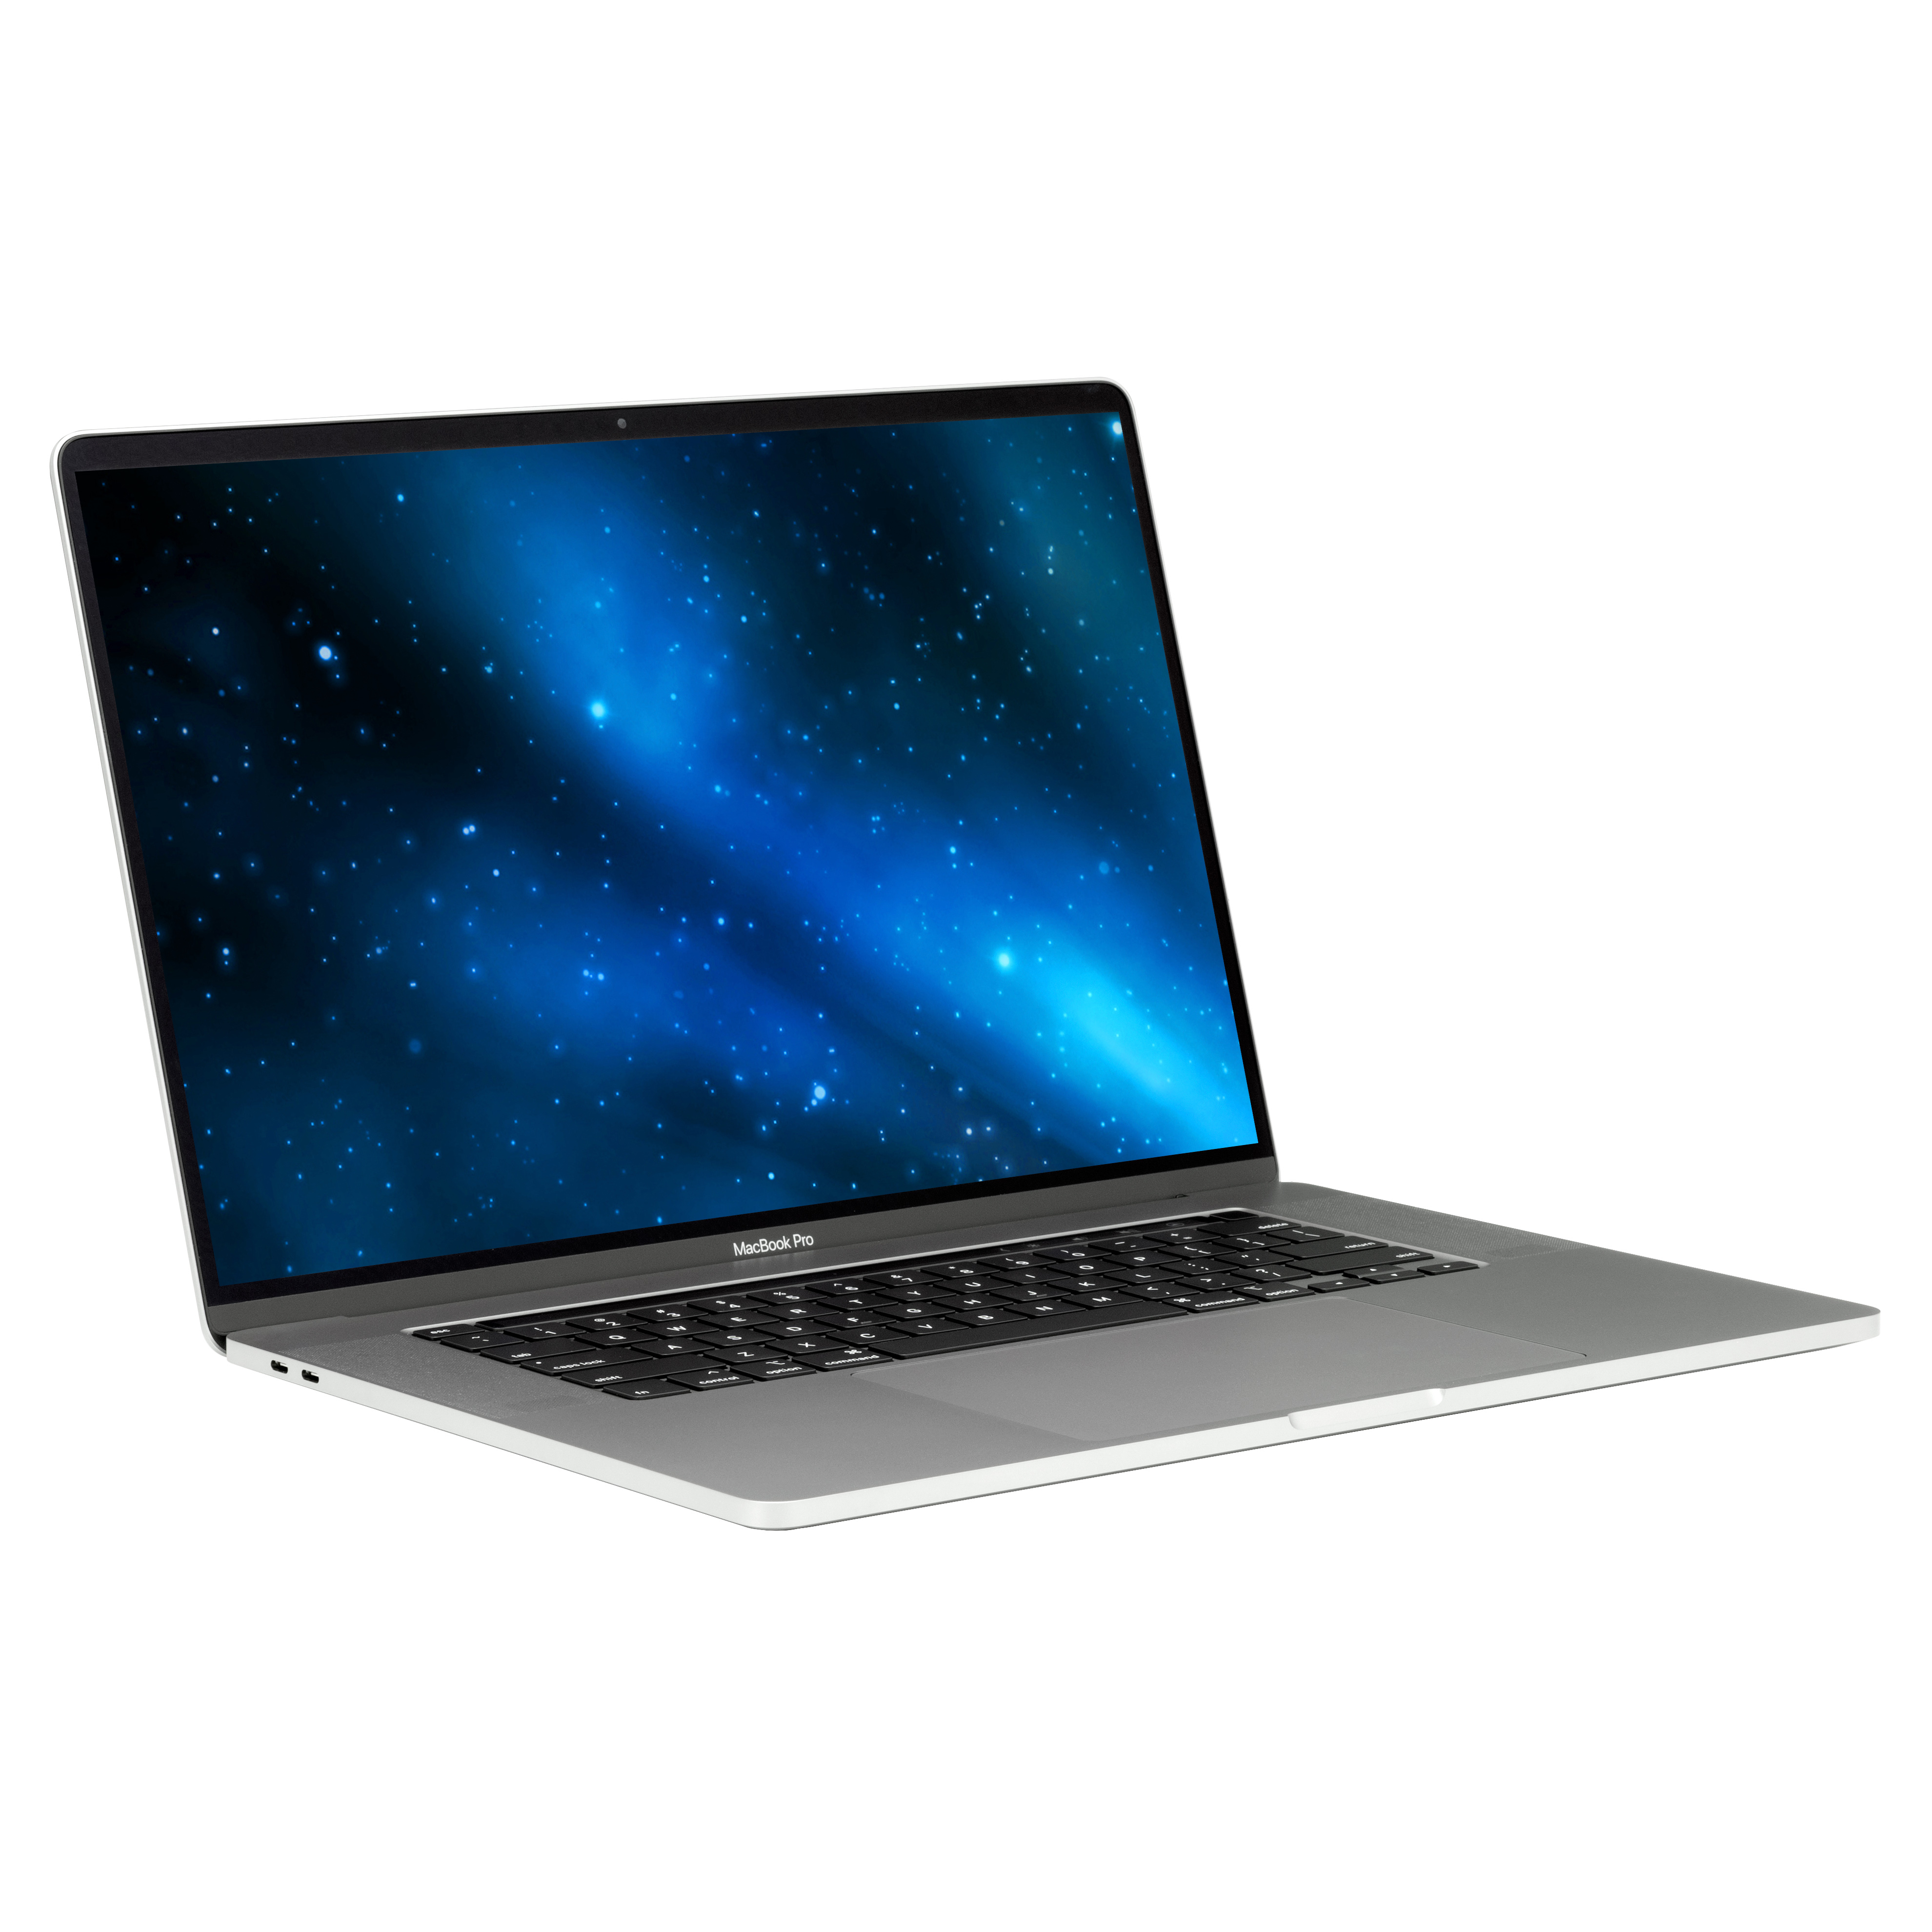 Configure your own 16-inch Apple MacBook Pro (2019) at OWC